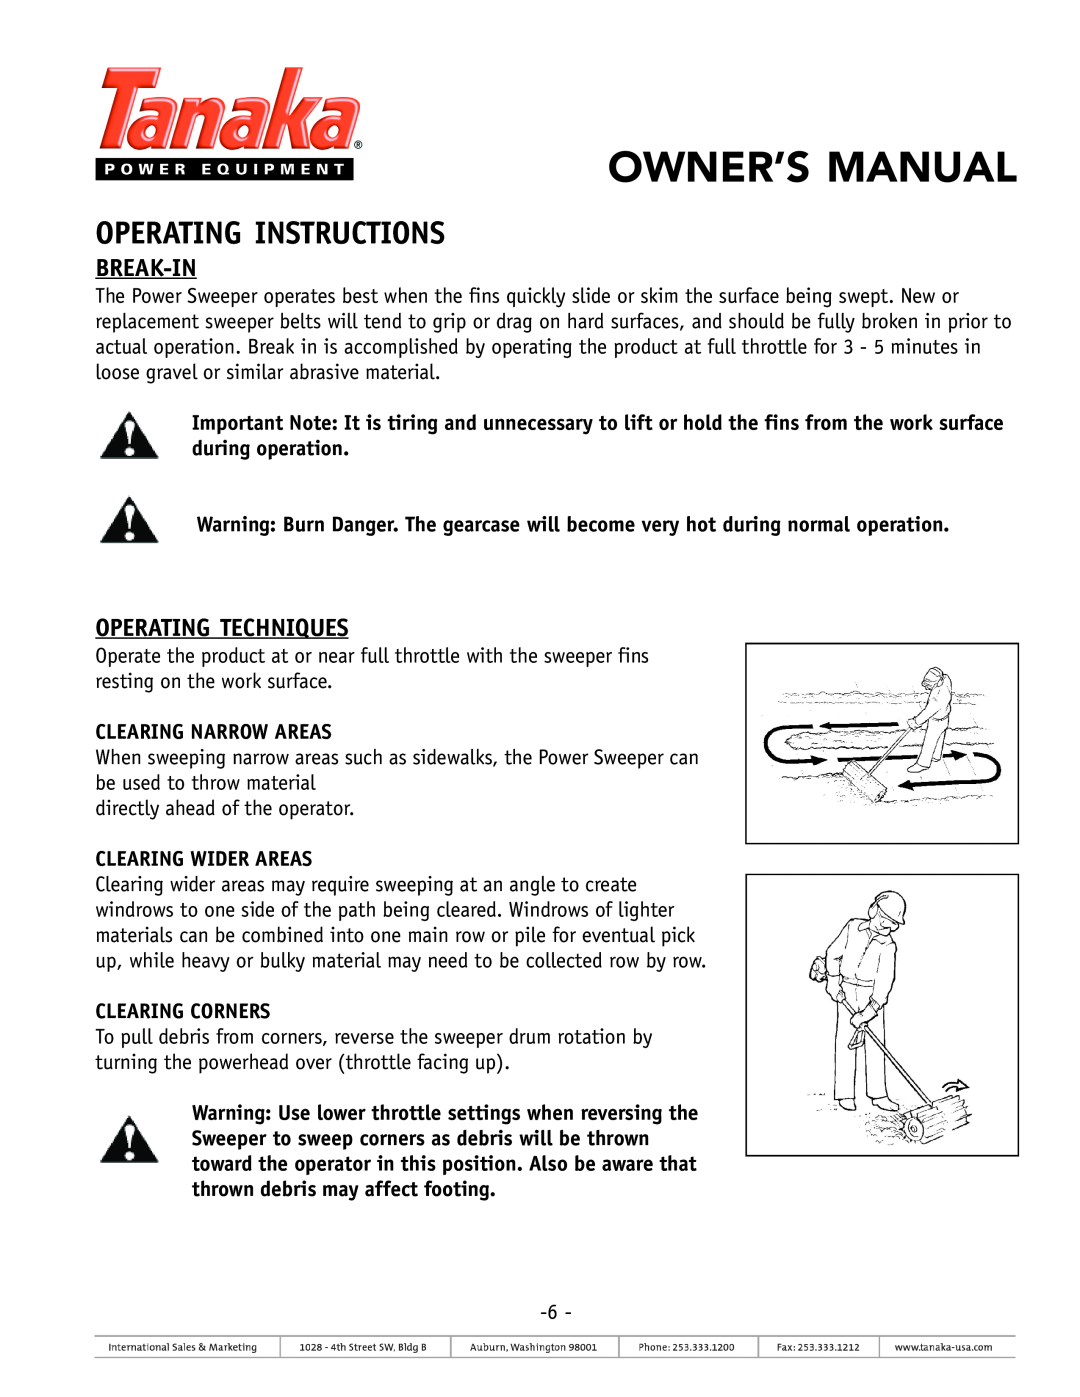 Tanaka TSW-210 Operating Instructions, Break-In, Operating Techniques, Clearing Narrow Areas, Clearing Wider Areas 